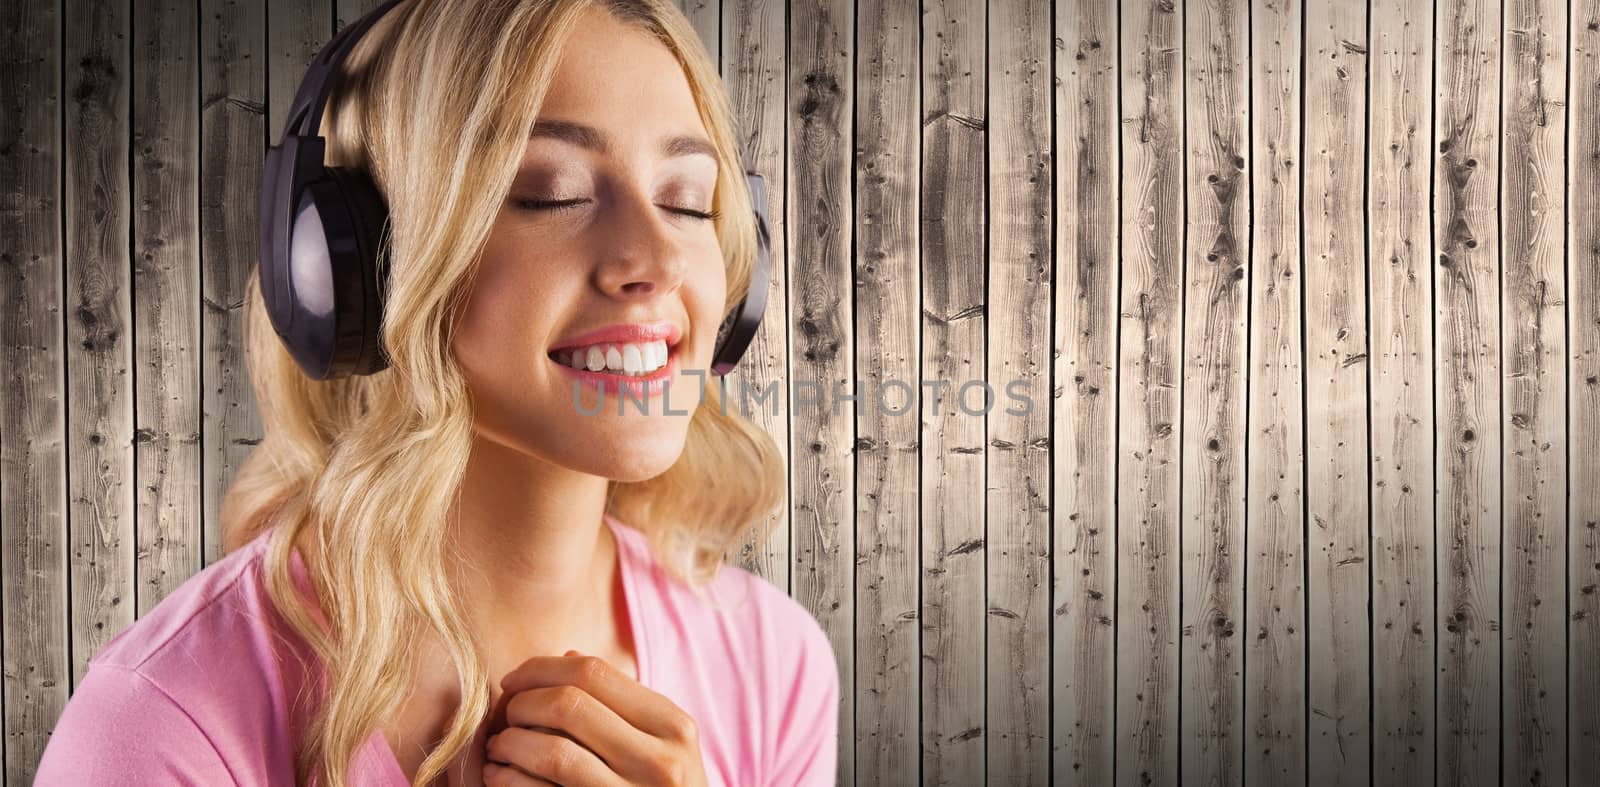 Composite image of close up of a woman listening to music  by Wavebreakmedia